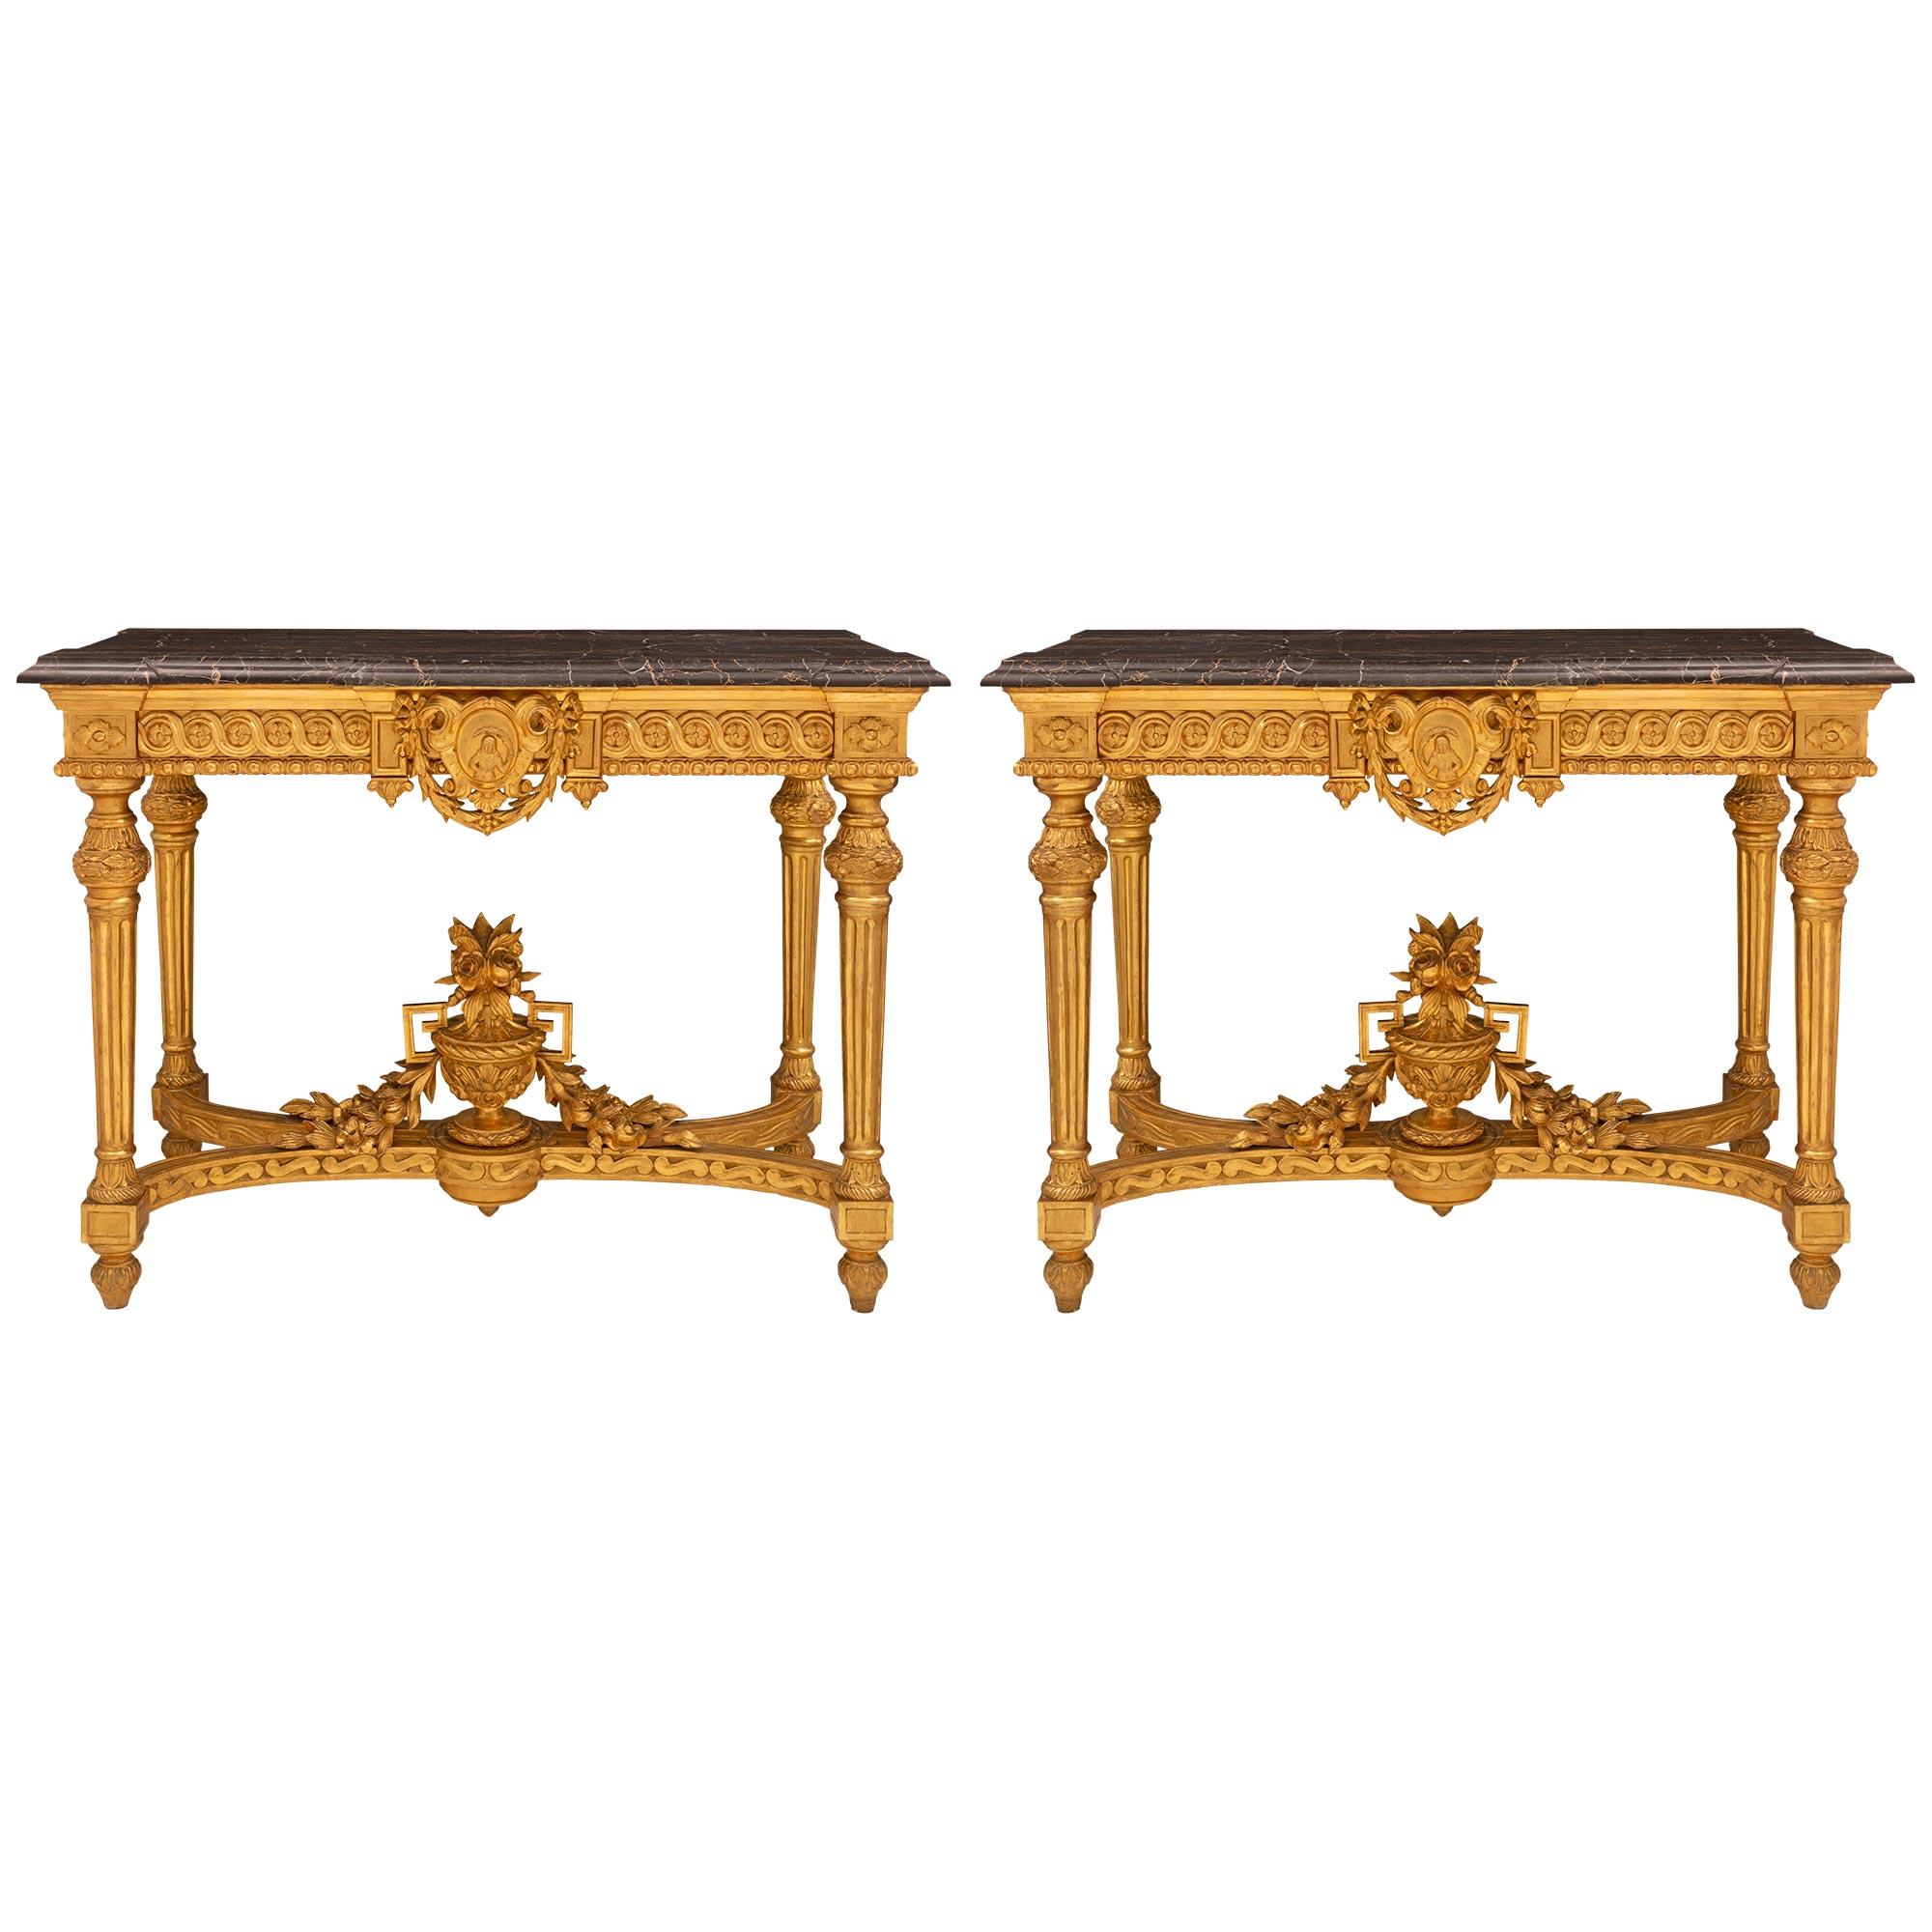 Pair of Italian Mid-19th Century Louis XVI Style Giltwood Freestanding Consoles For Sale